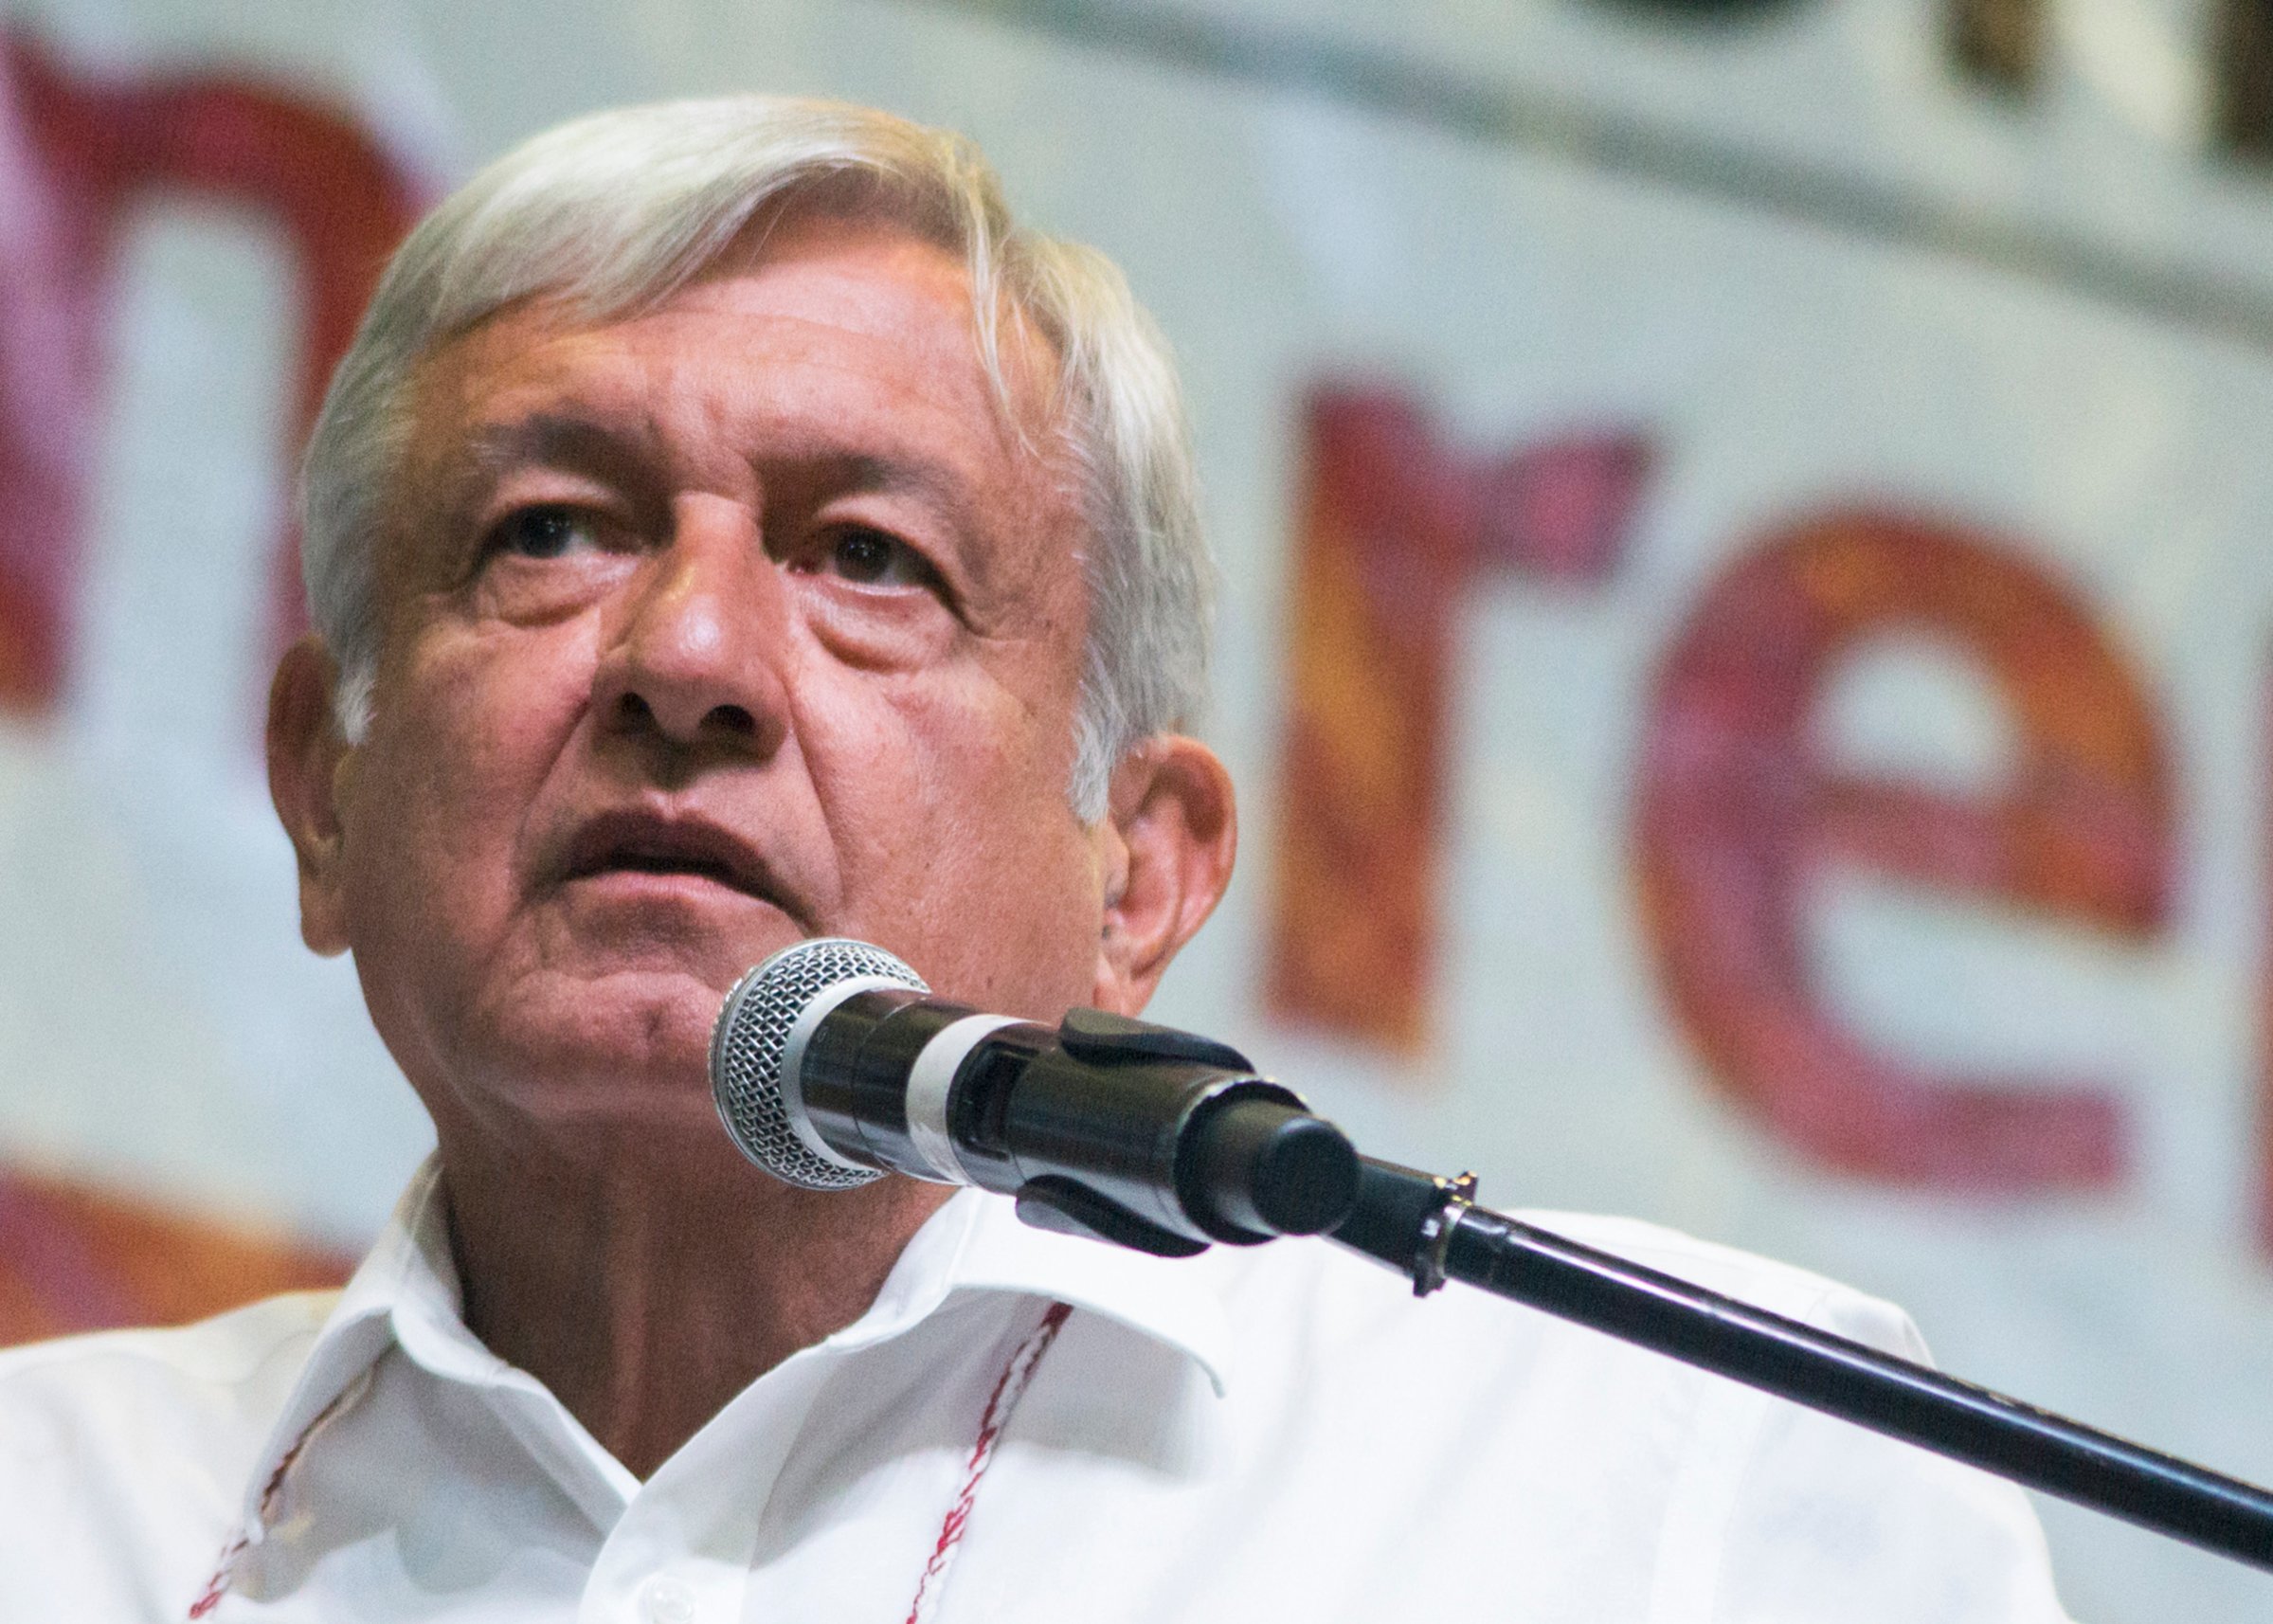 Mexican presidential candidate López Obrador pushes for votes in Baja California